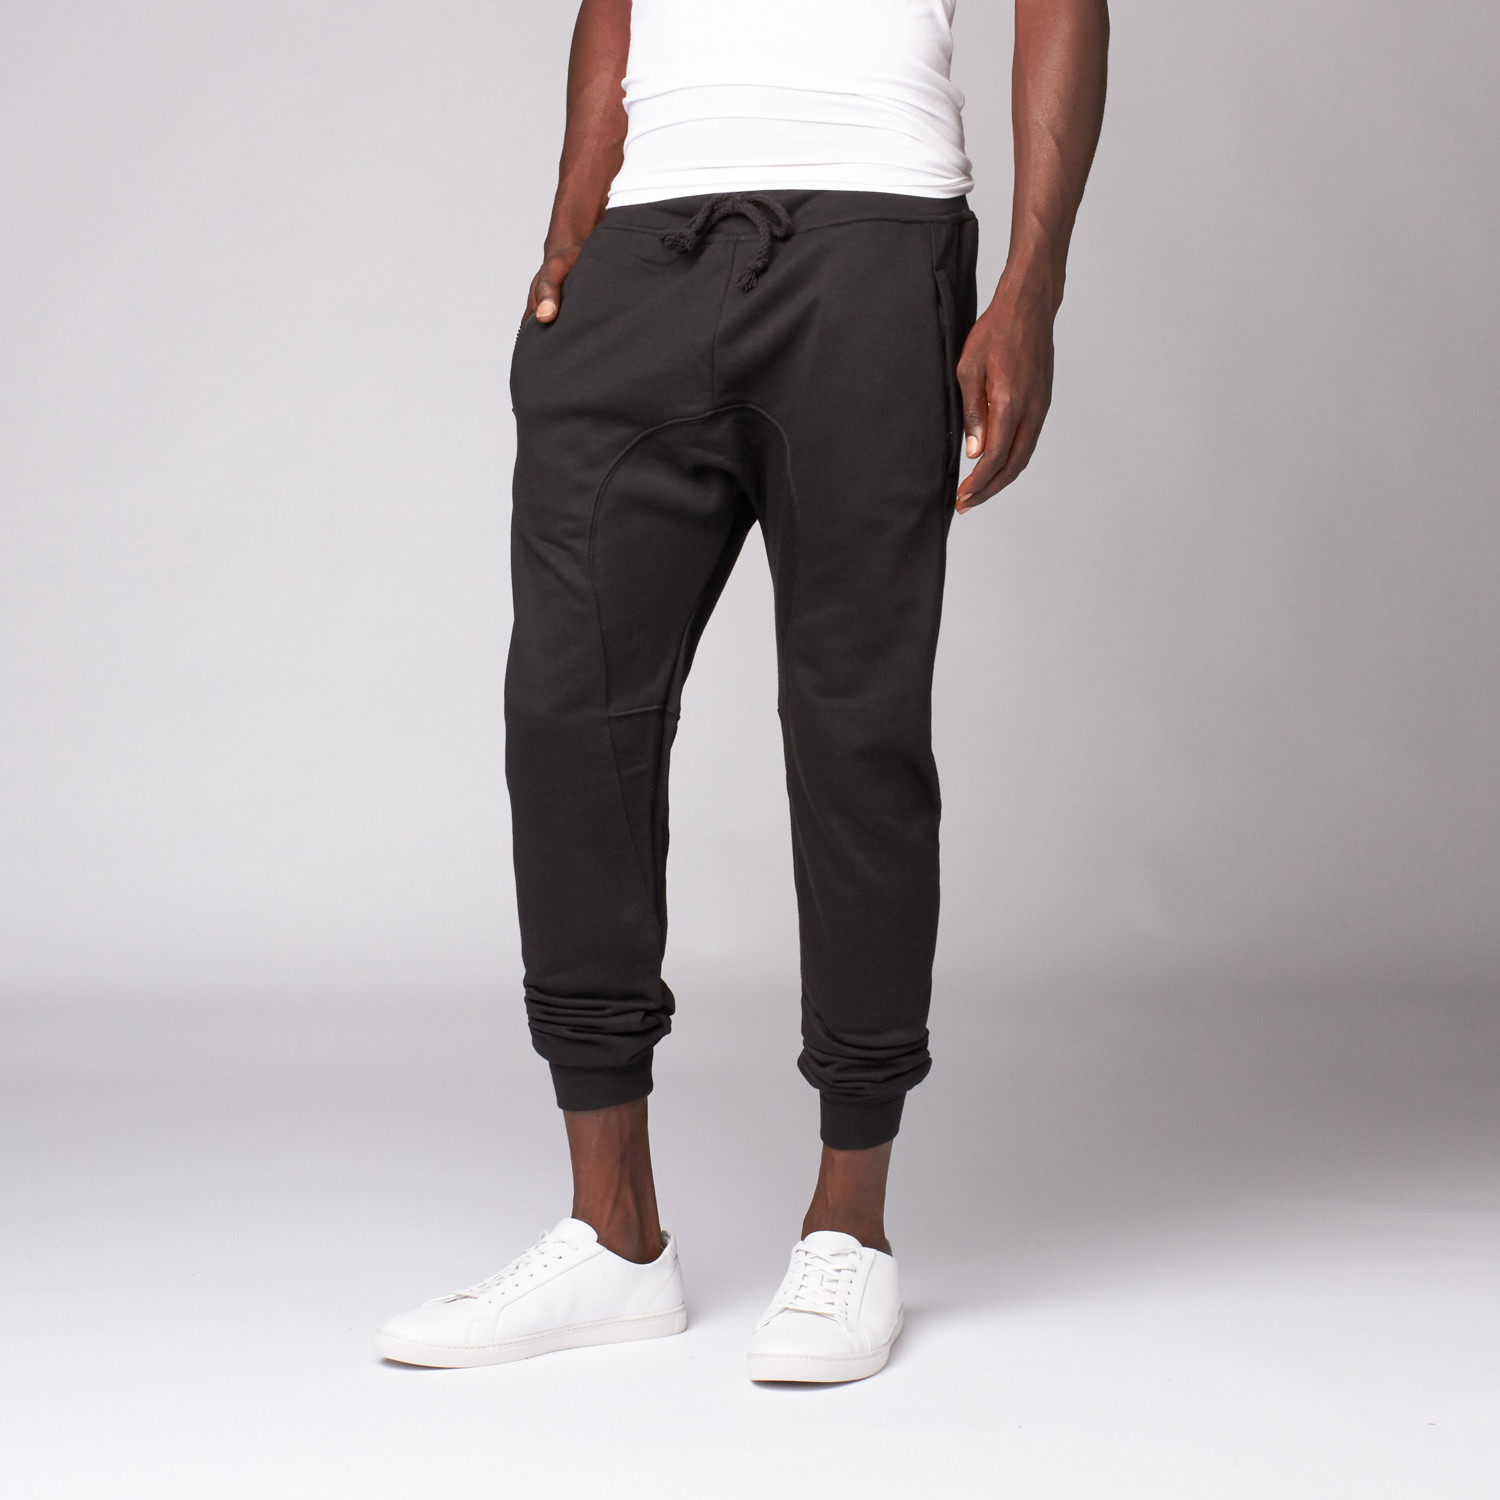 00 Nothing // The Standards Joggers // Black (S) - Casual Cool - Touch ...